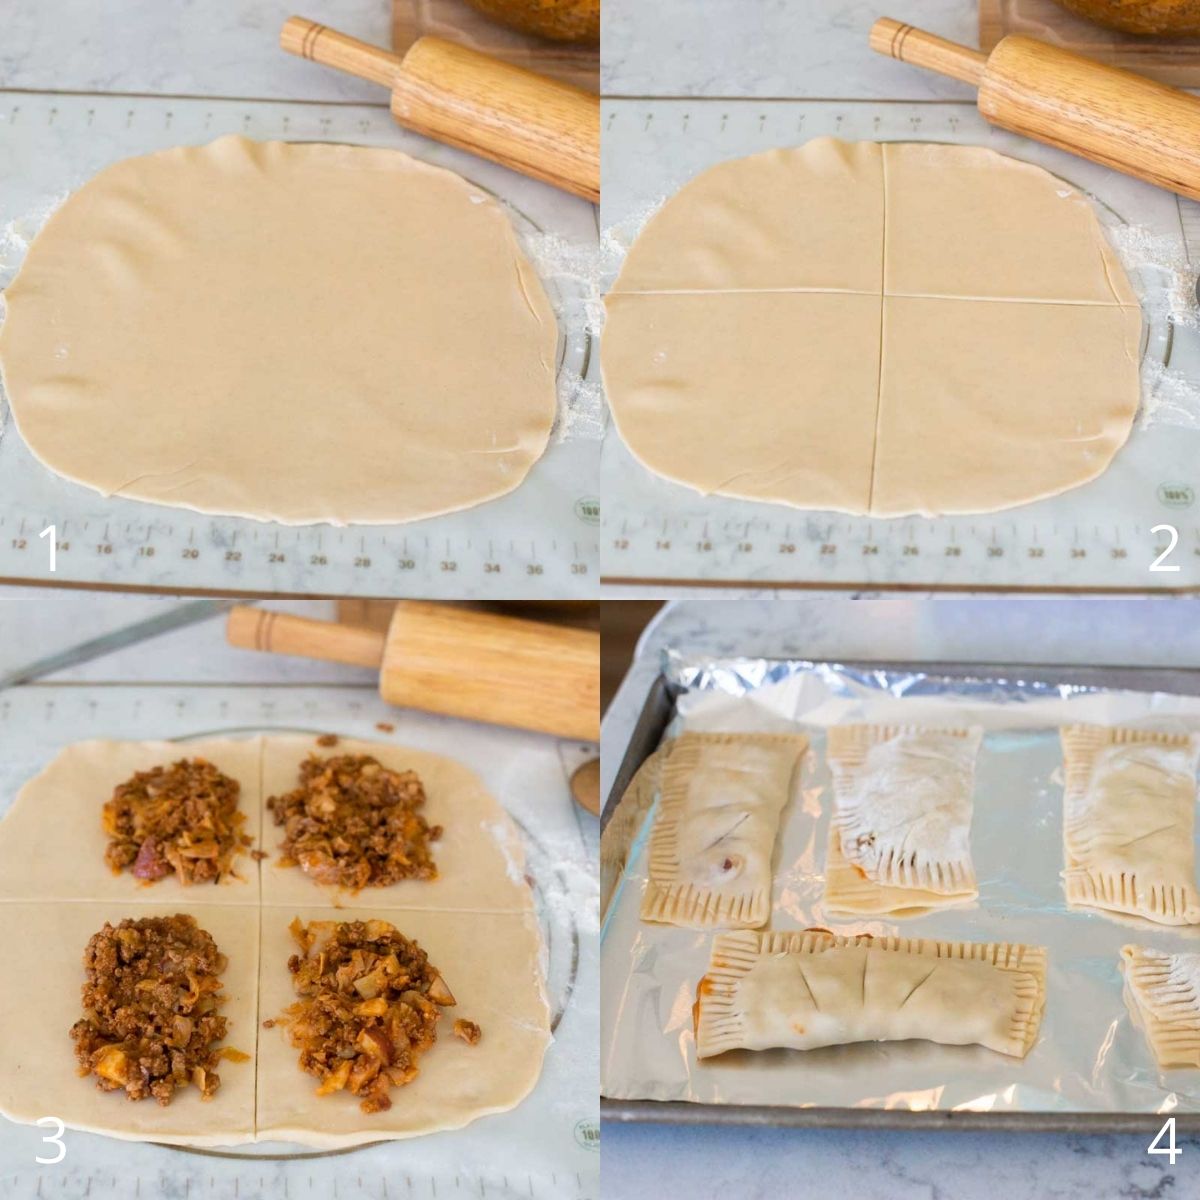 A step by step photo shows how to assemble the beef hand pies